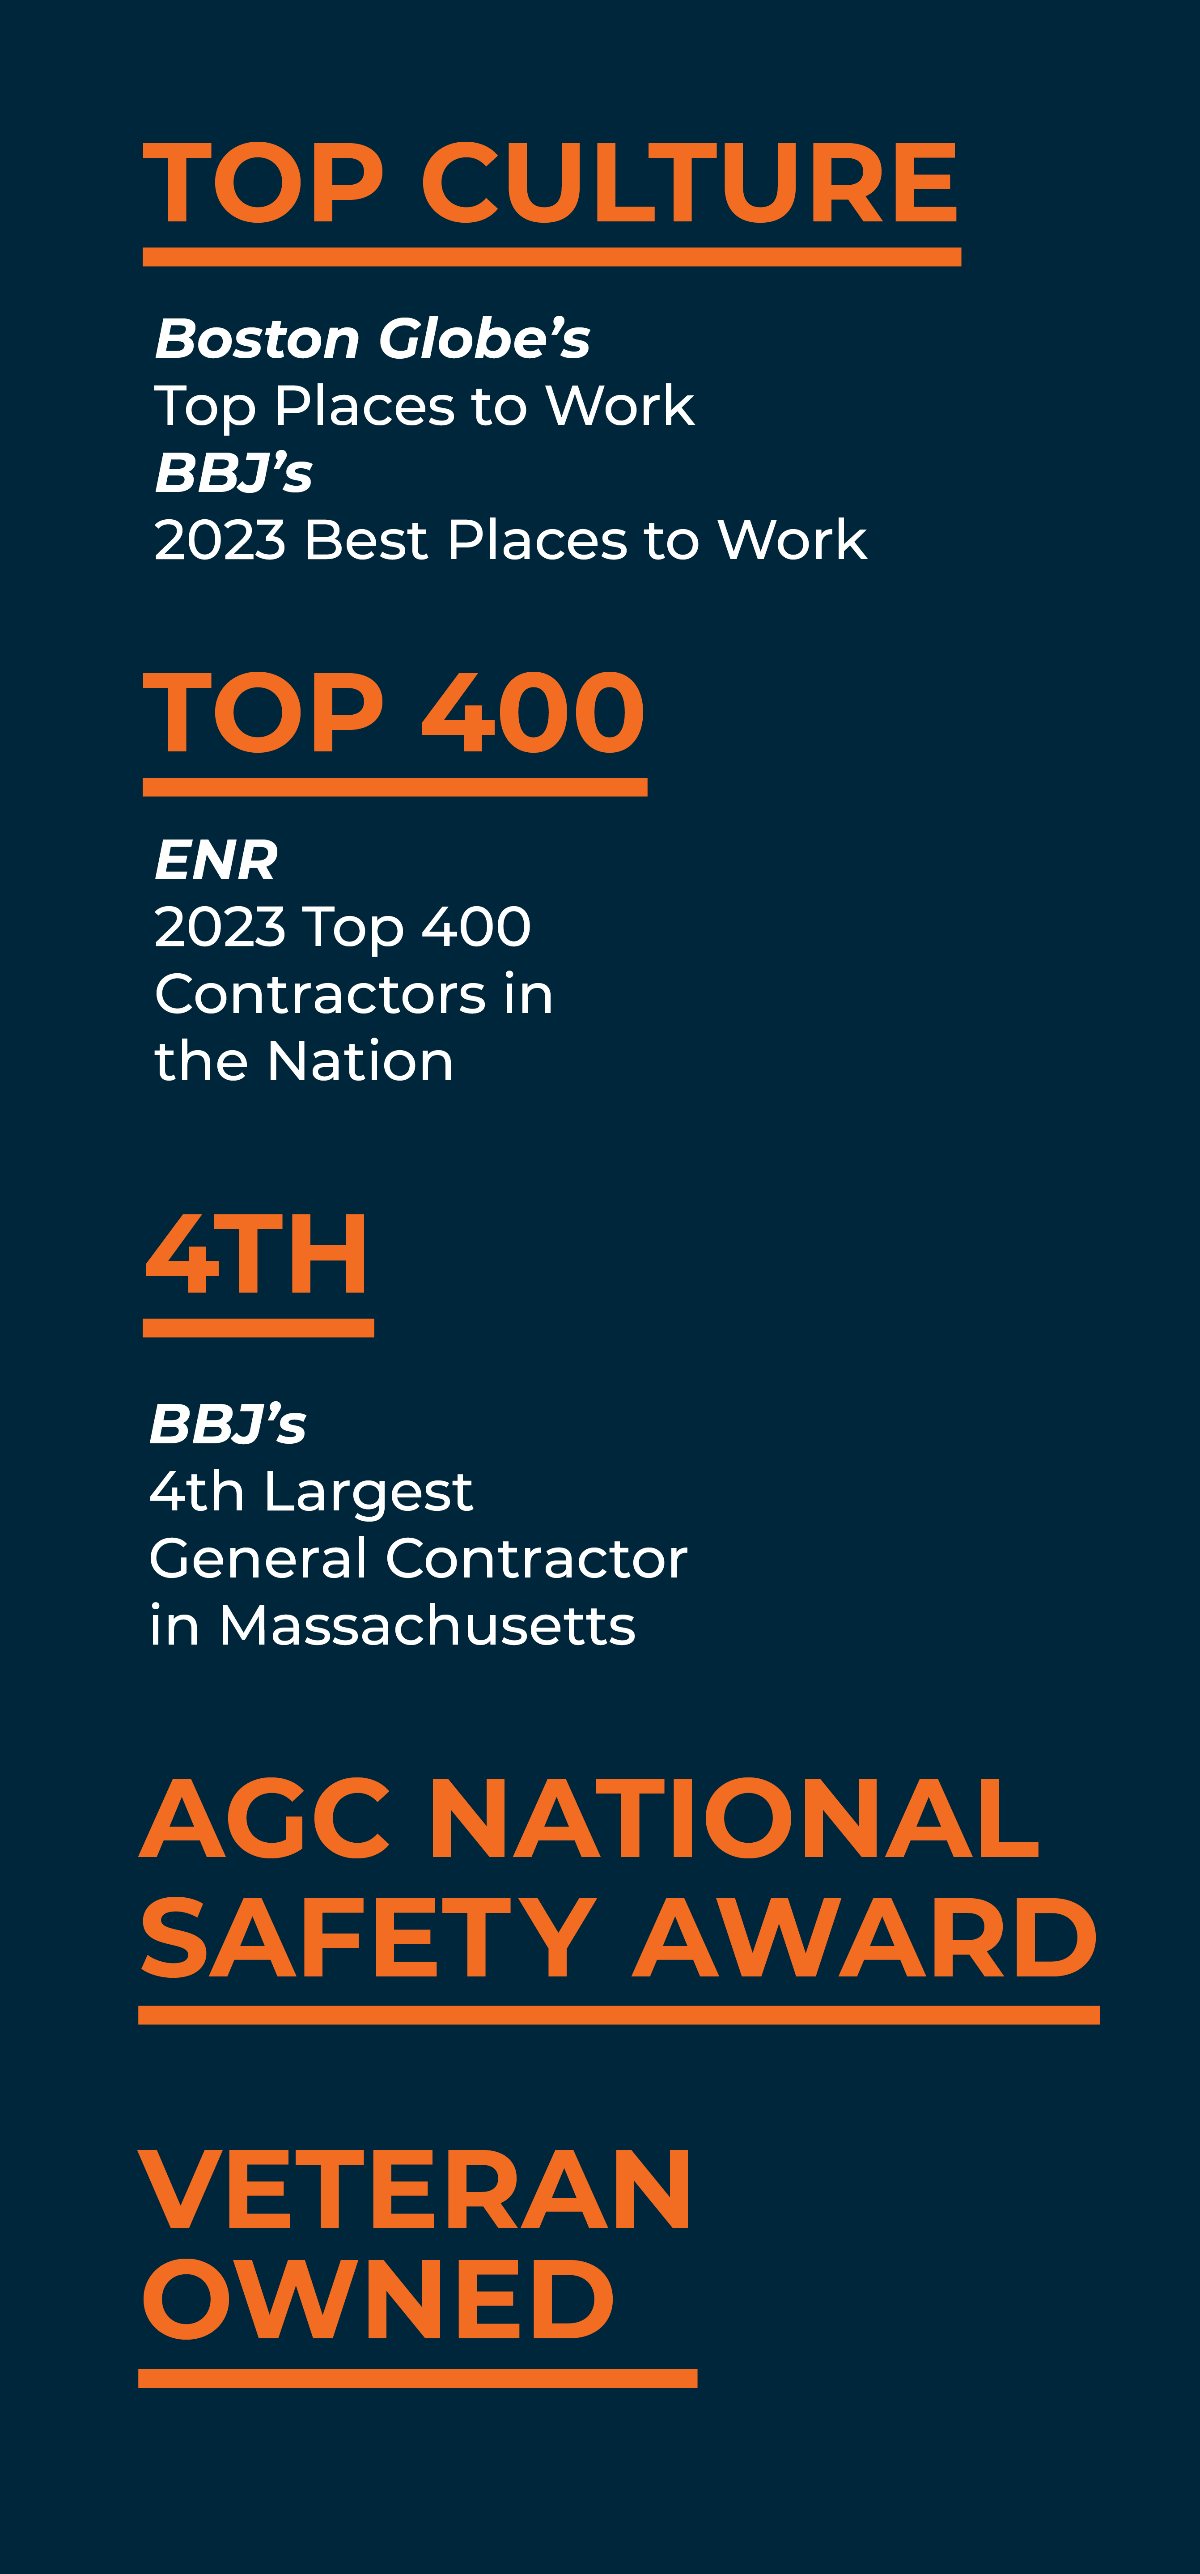 TOP CULTURE Boston Globe's Top Places to Work BBI's 2023 Best Places to Work TOP 400 ENR 2023 Top 400 Contractors in the Nation 4TH BBI'S 4th Largest General Contractor in Massachusetts AGC NATIONAL SAFETY AWARD VETERAN OWNED